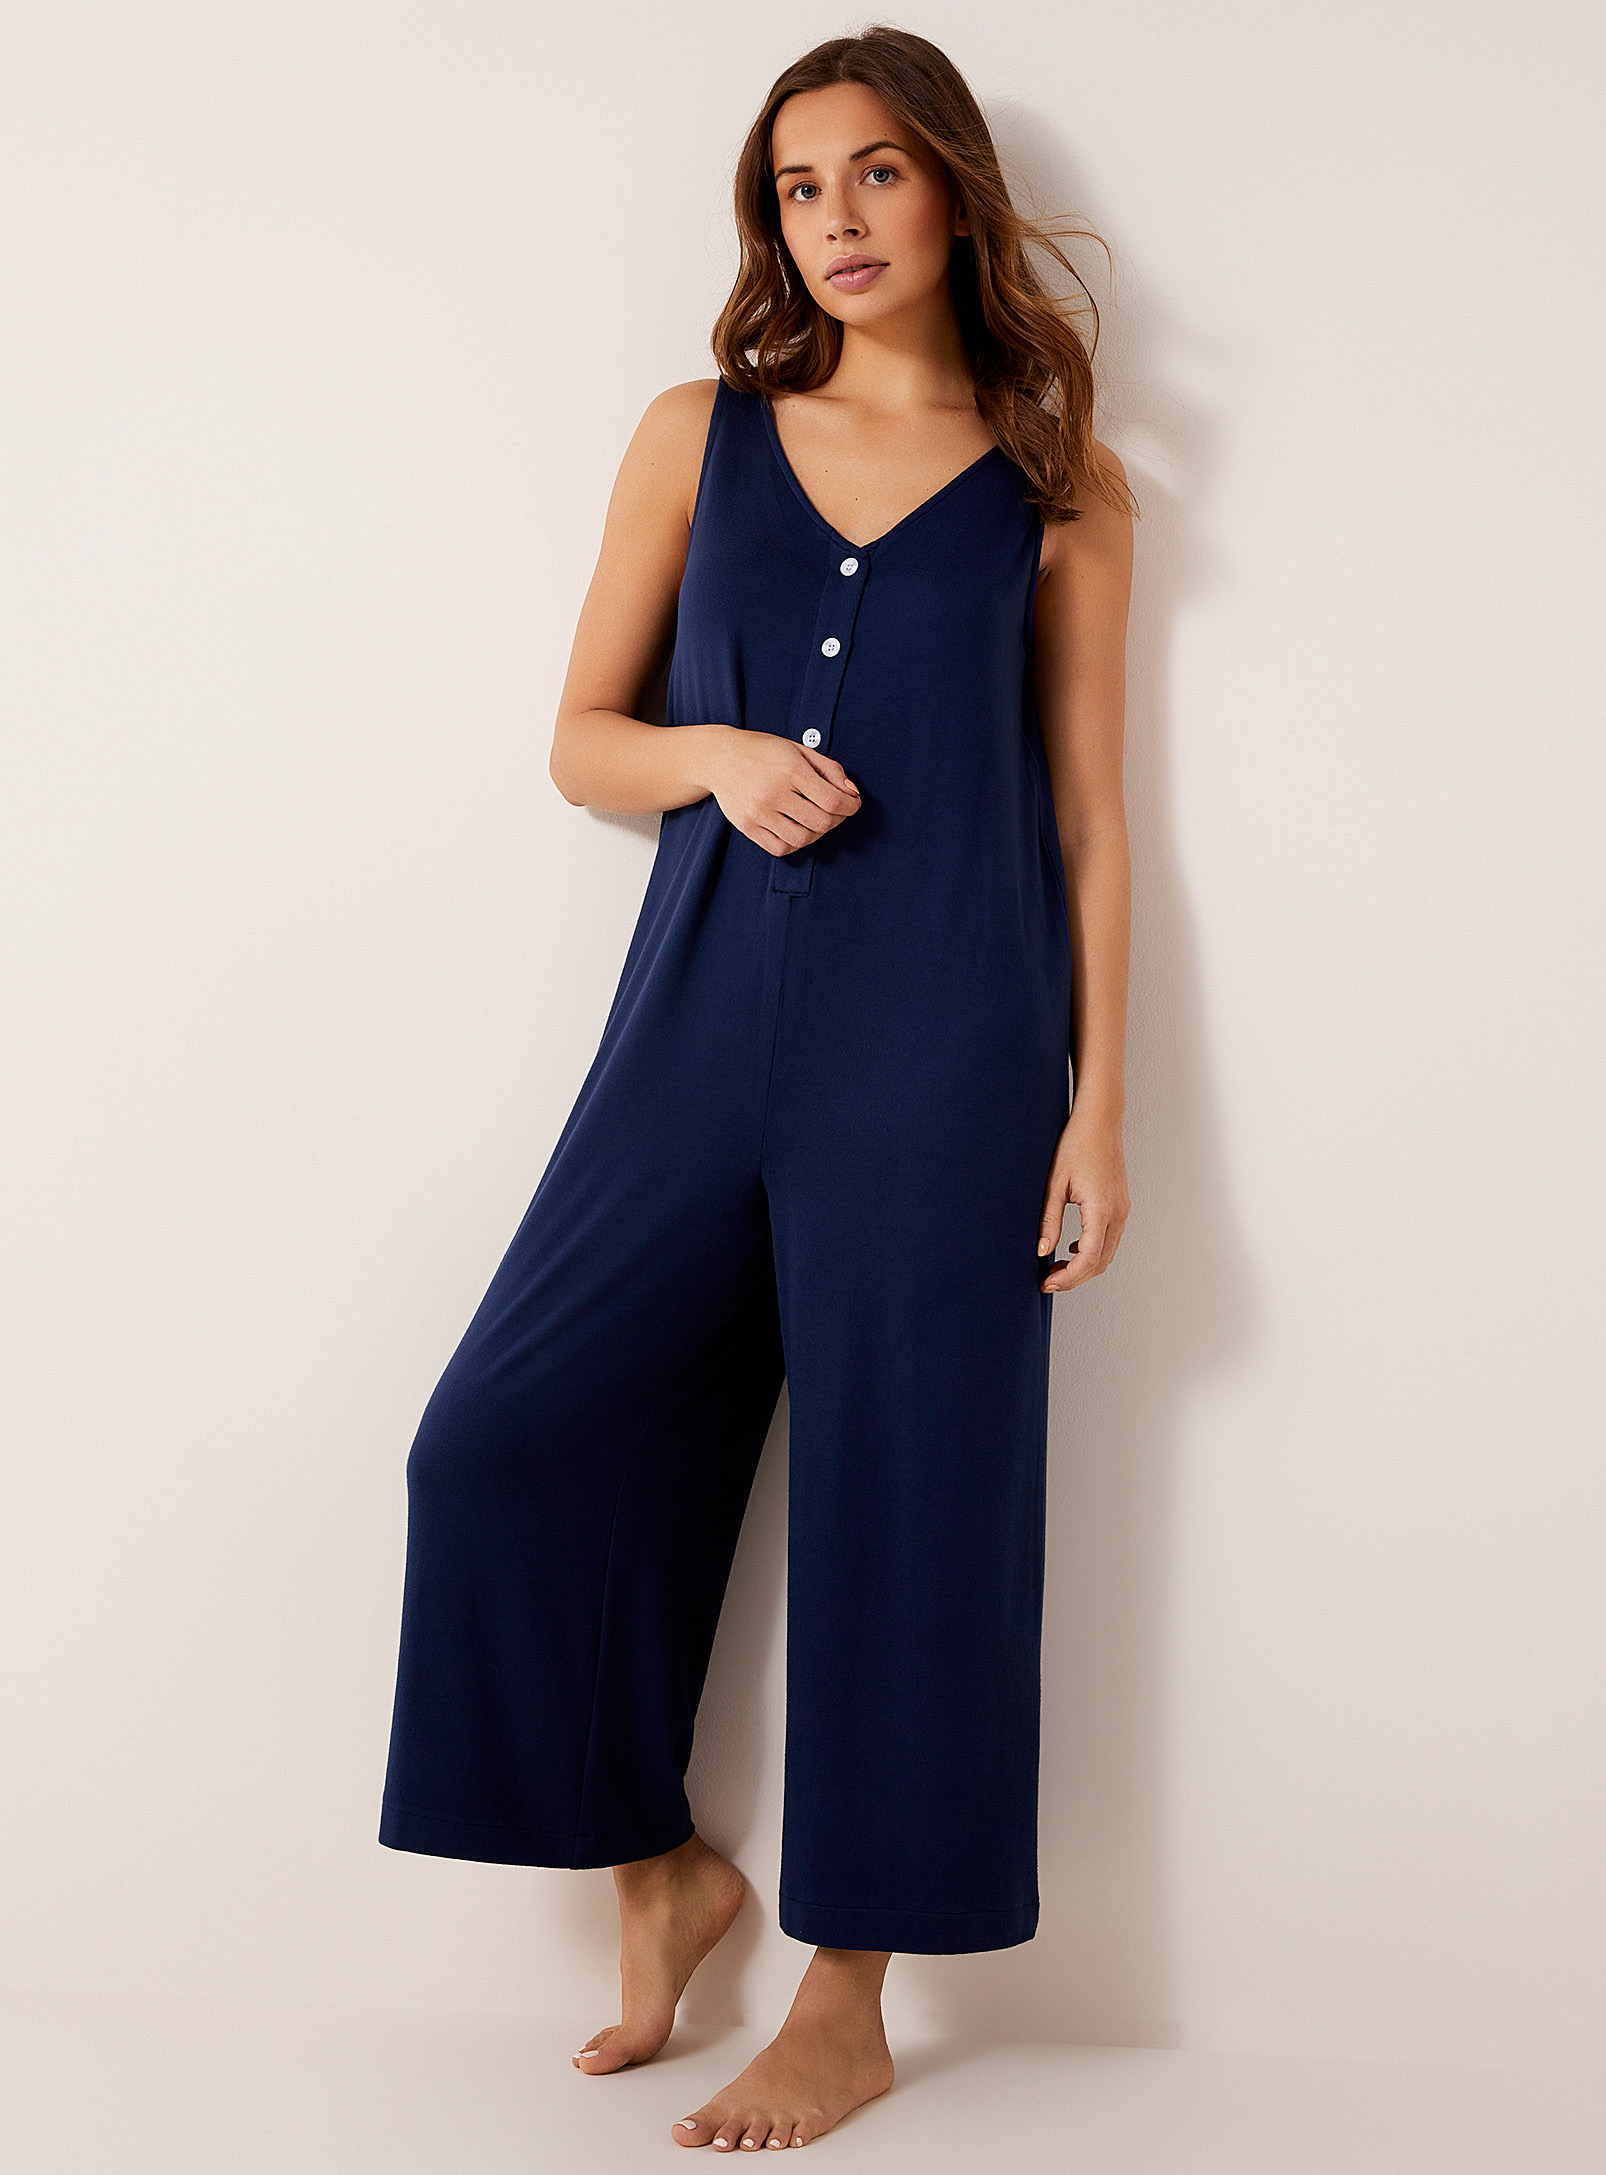 Miiyu - Women's Recycled polyester knit lounge jumpsuit